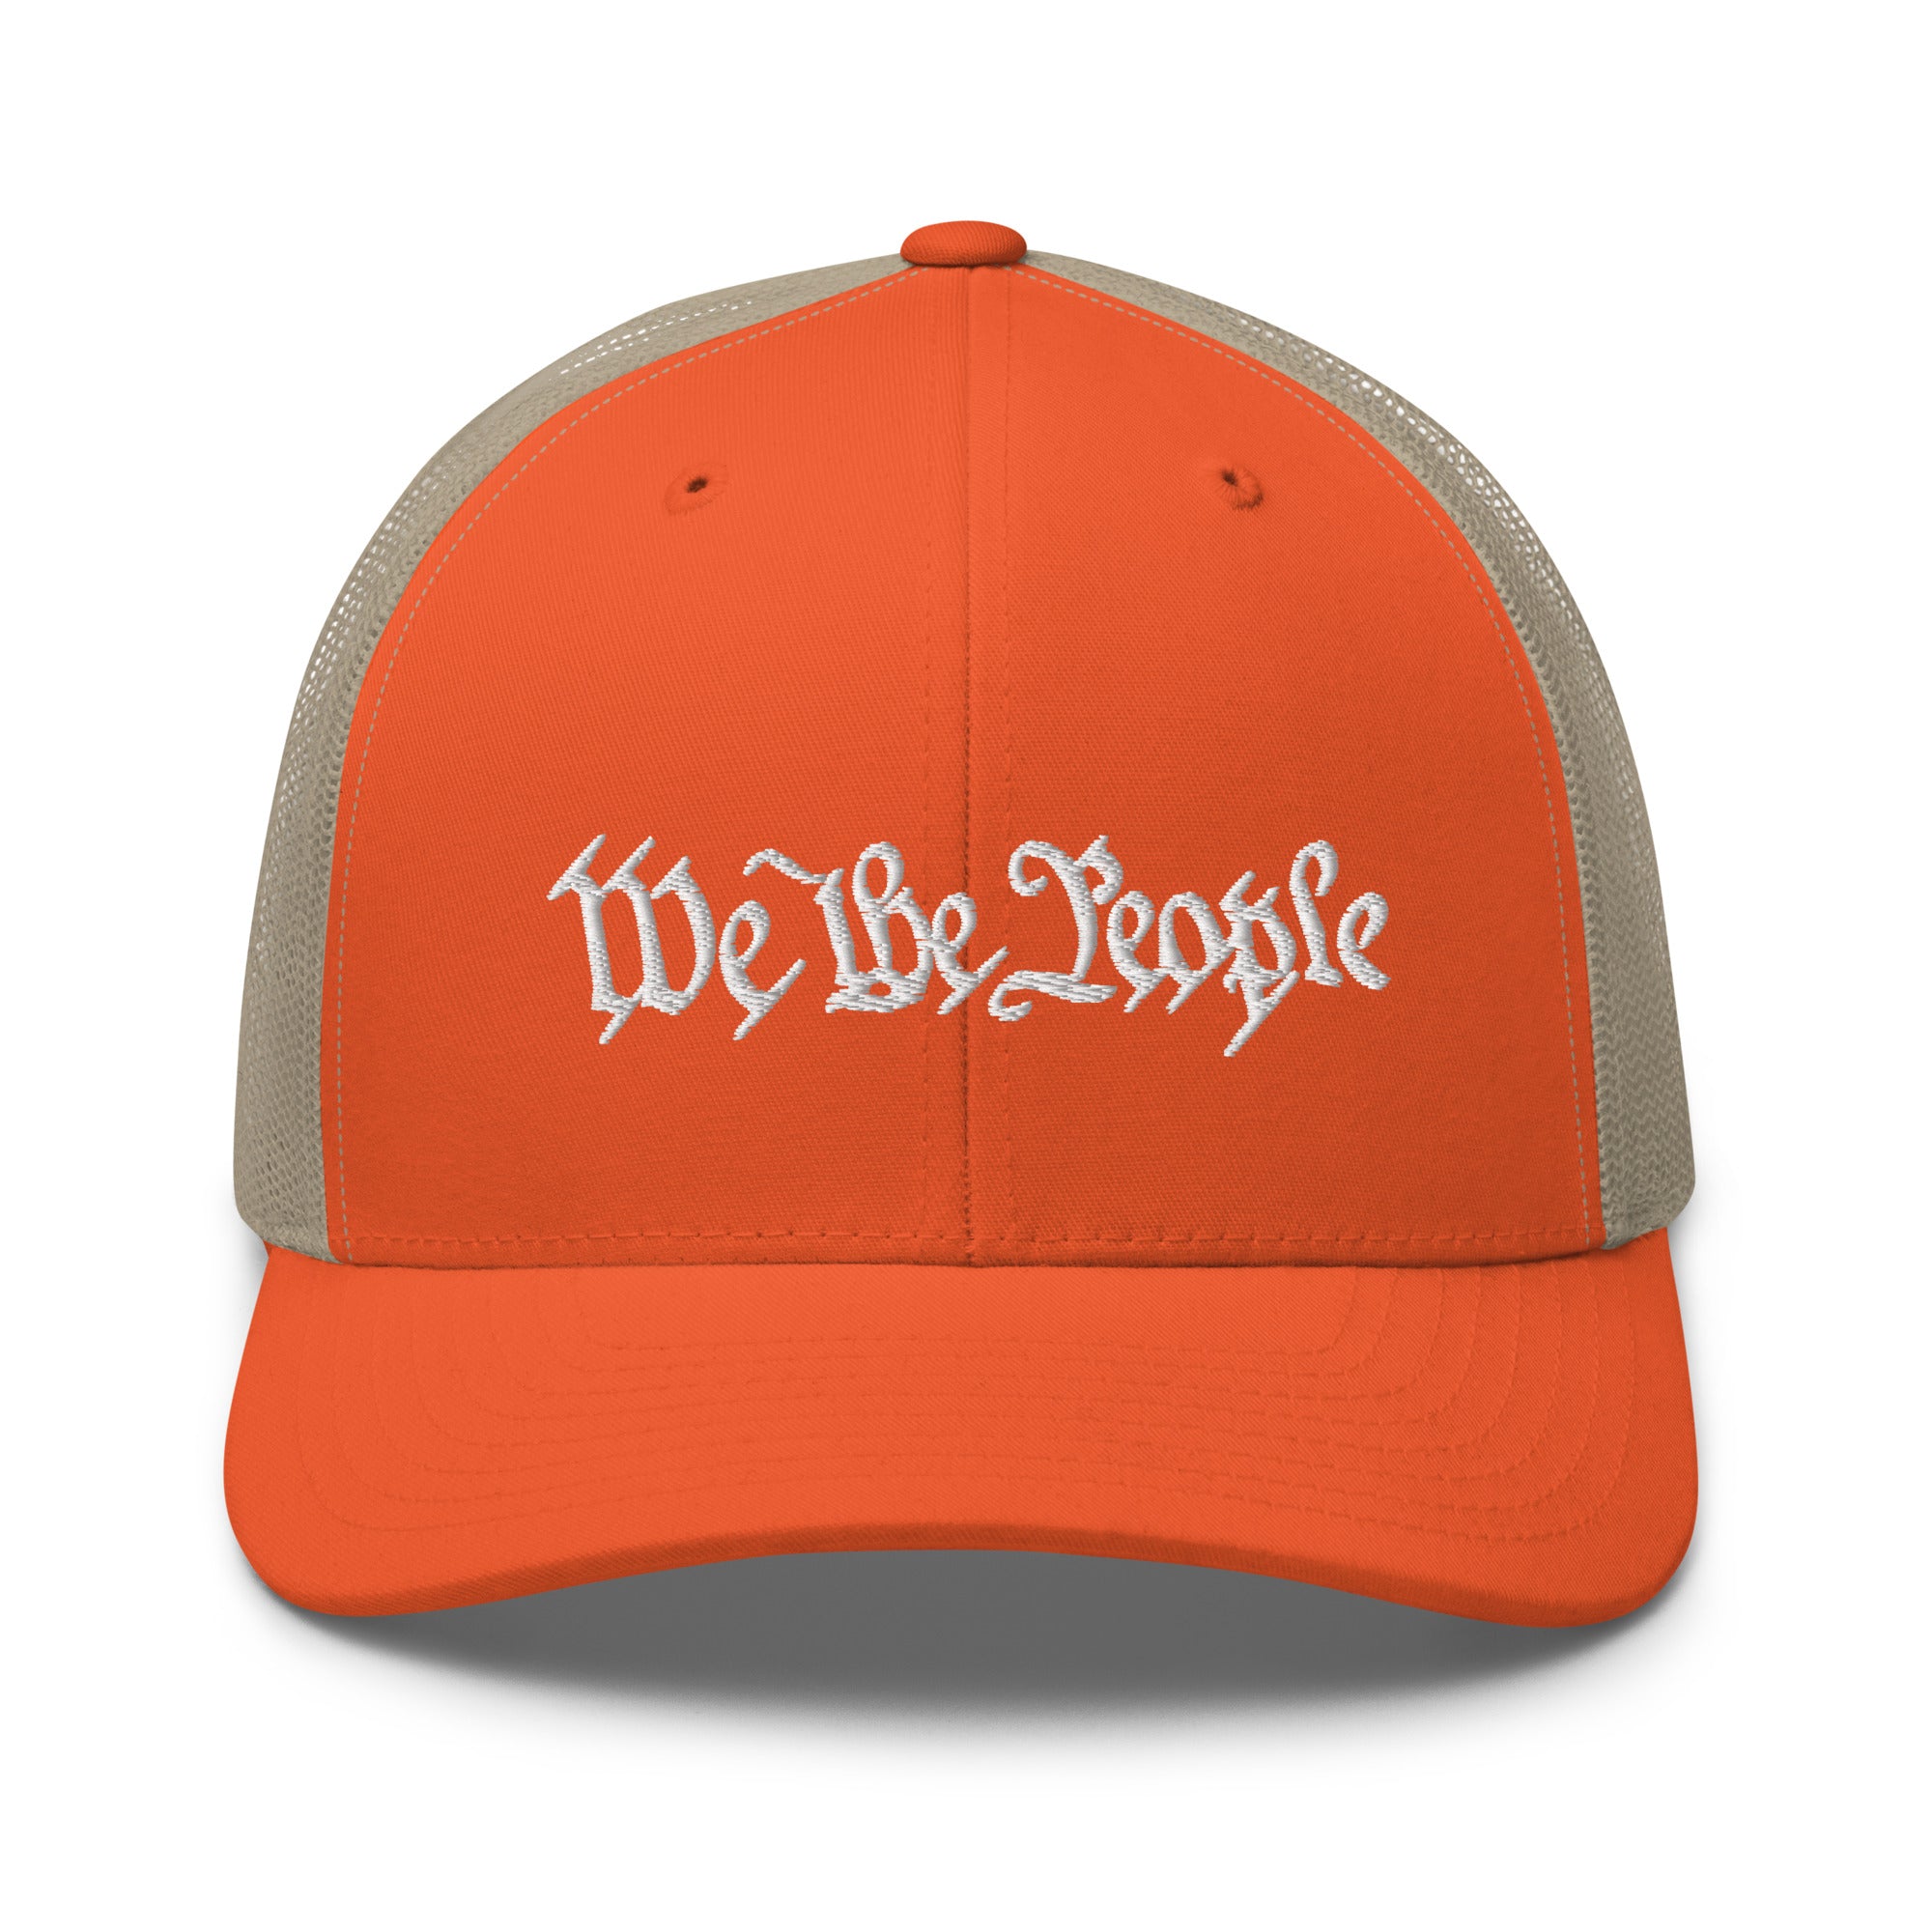 We The People Embroidered Trucker Cap